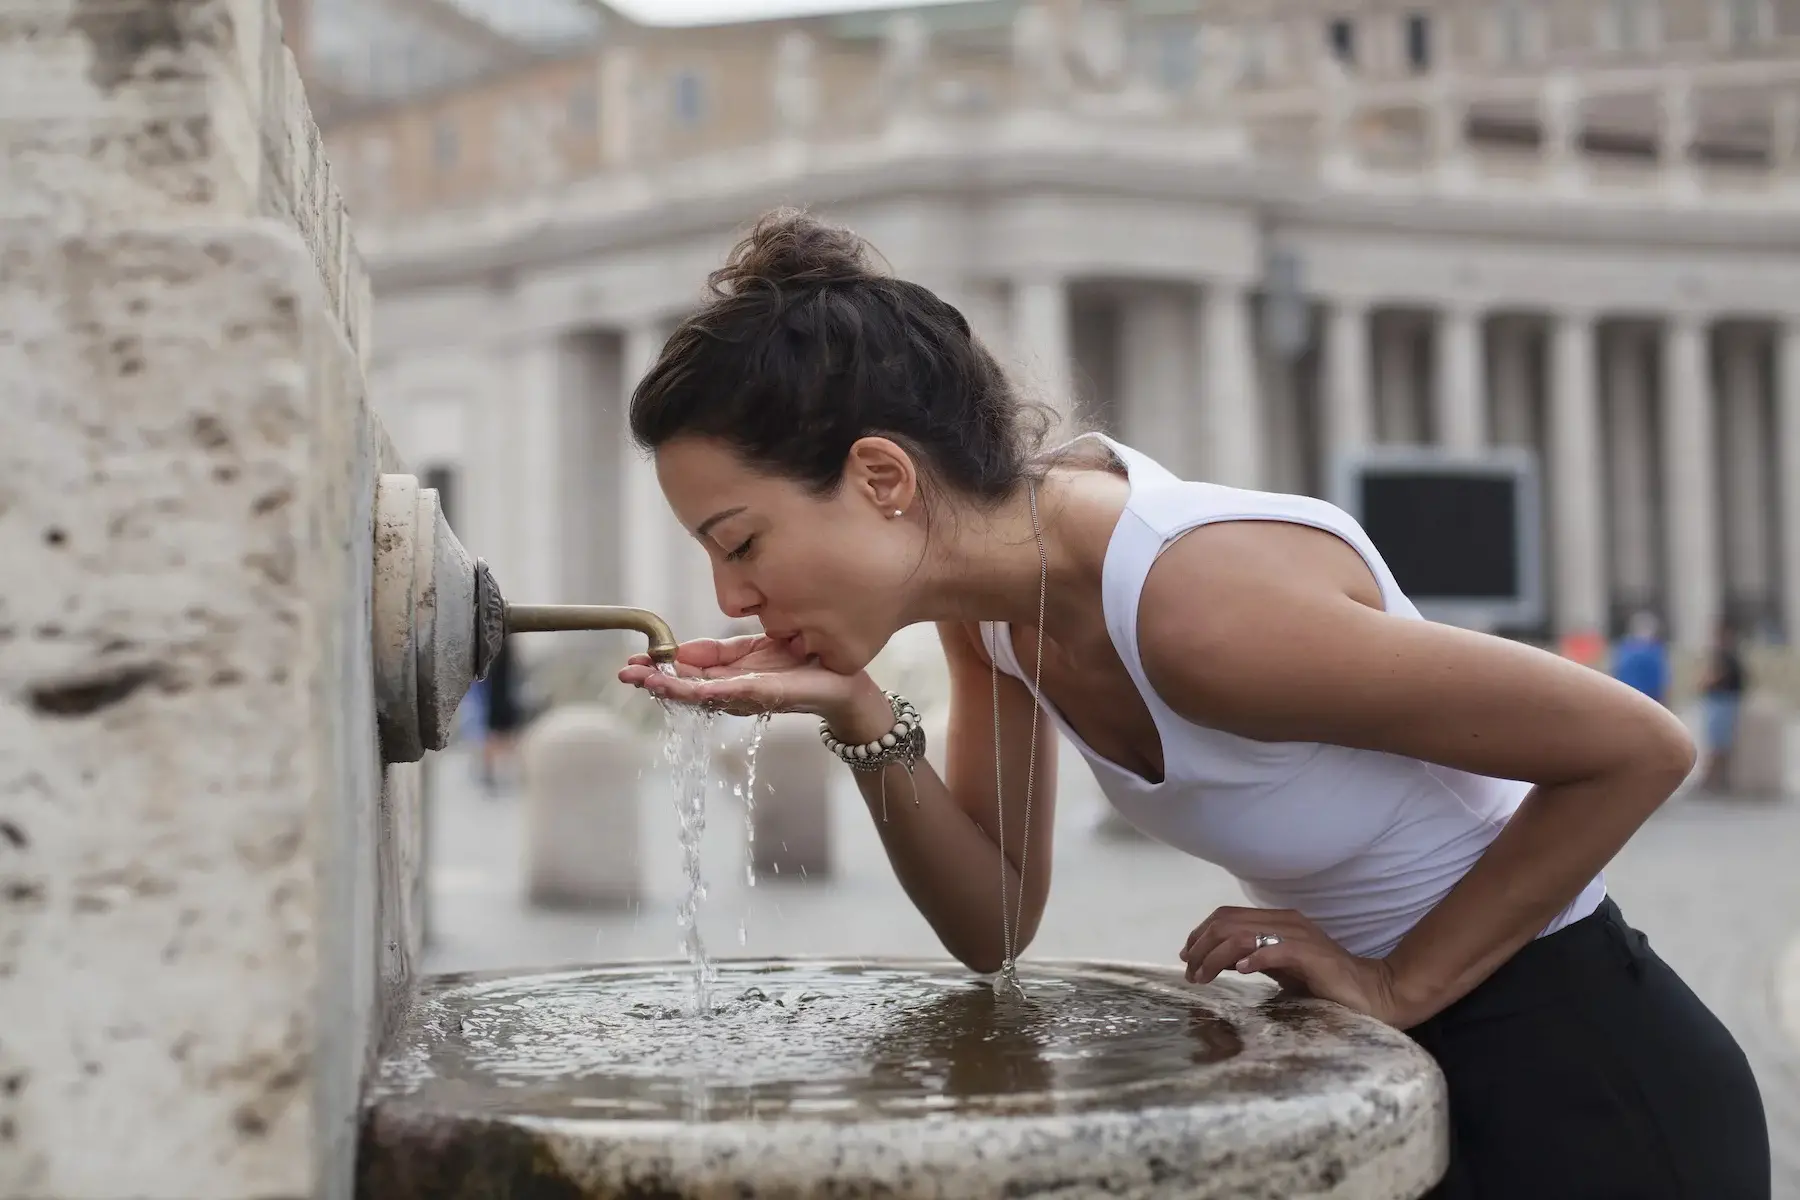 A young woman cups her hand to drink from a water fountain at Saint Peter's Square in Rome